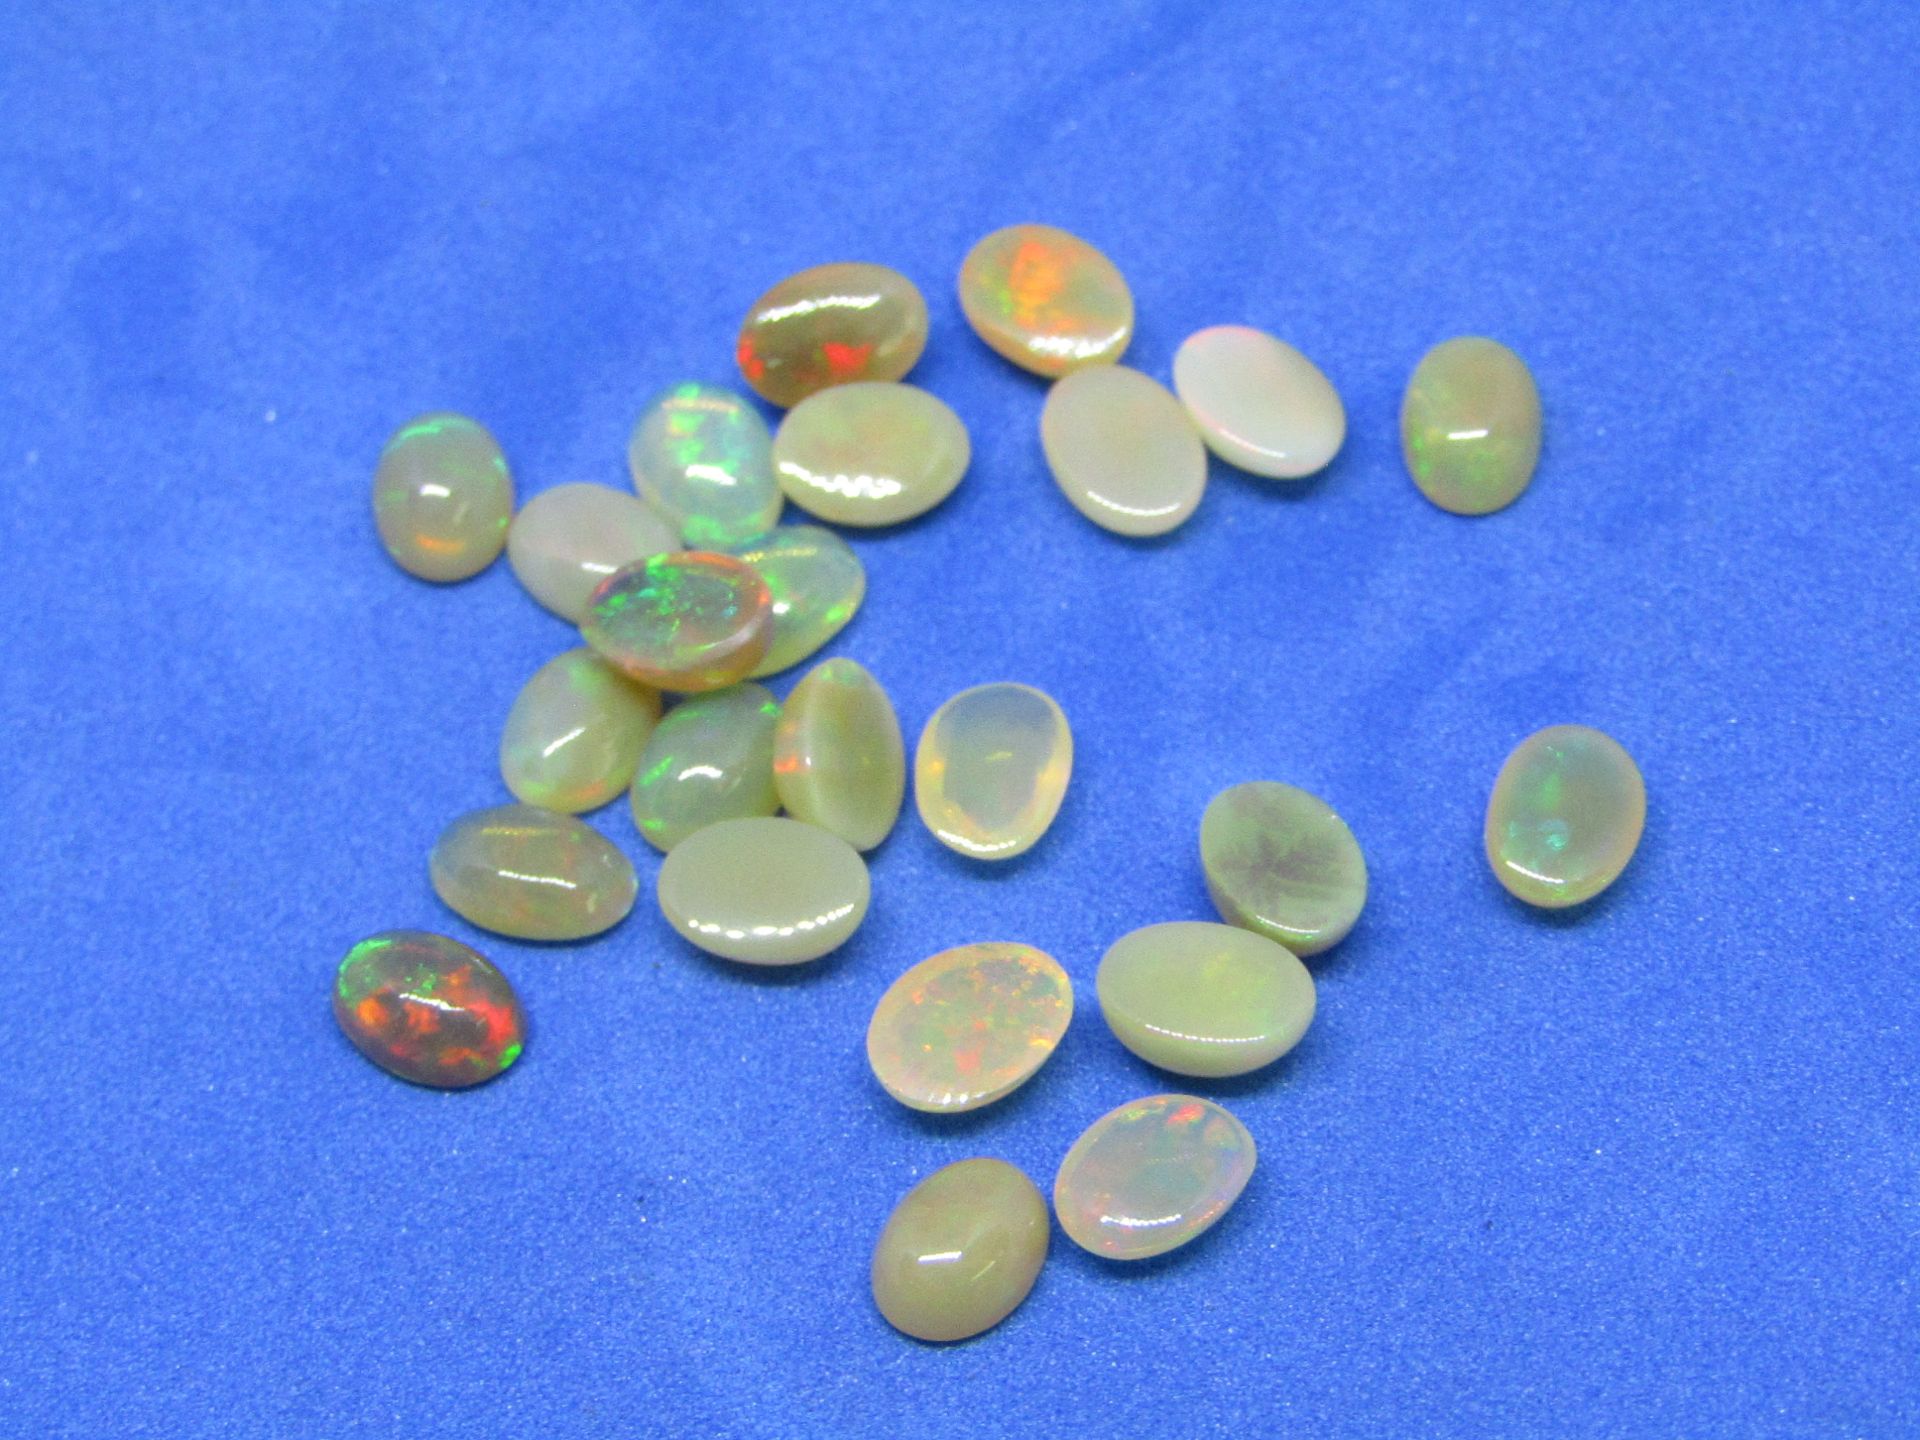 ** NO BUYERS COMMISSION ON THIS LOT ** Natural Ethiopian Opal - 12.00 Carat - 24 Pieces. Average